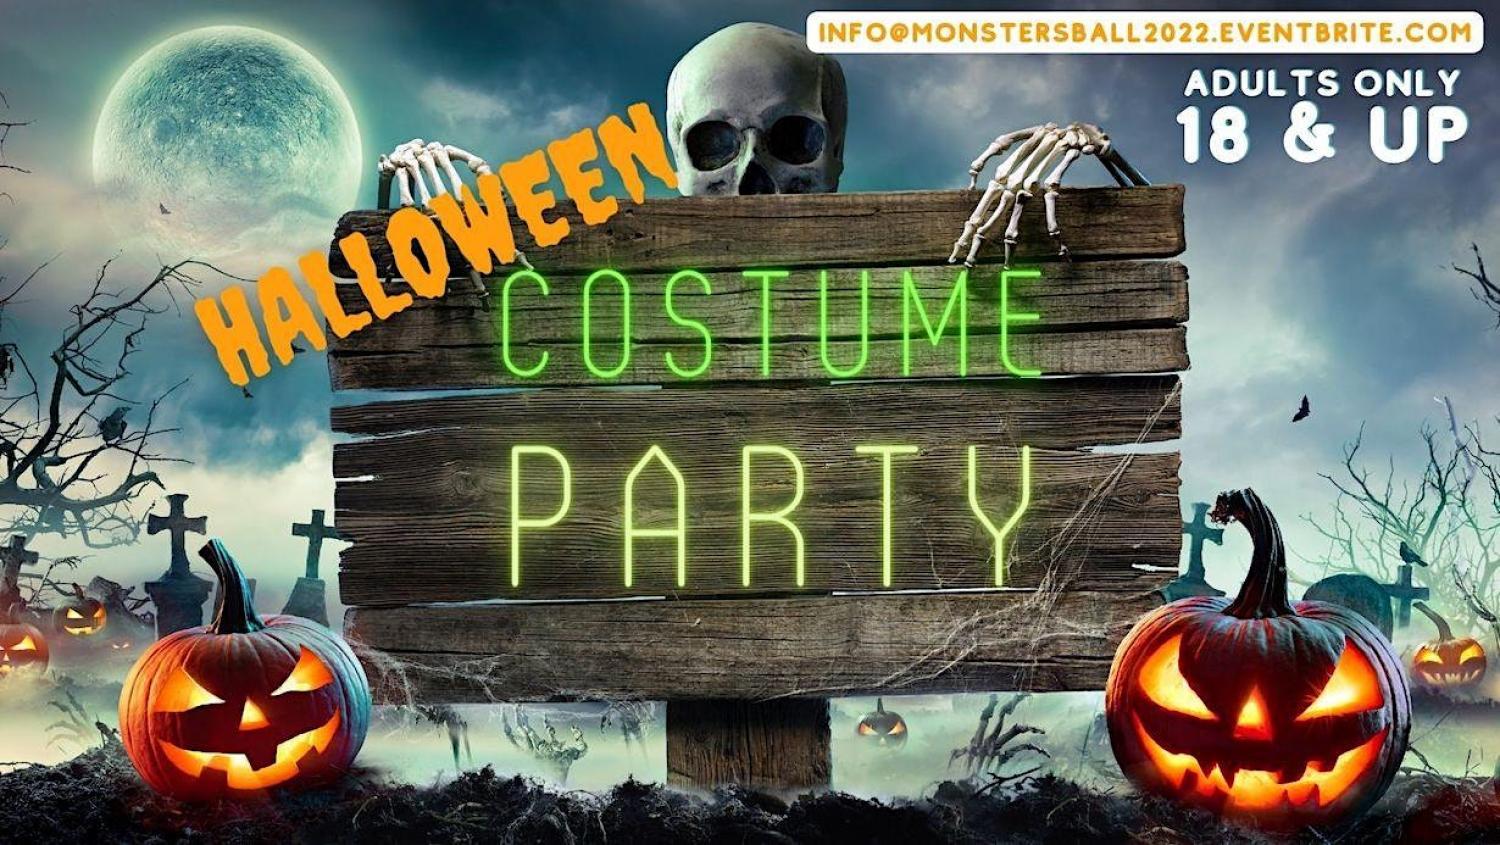 Monsters Ball |A Halloween Themed Murder Mystery Costume Party (18+ only)
Sun Oct 30, 8:00 PM - Mon Oct 31, 2:00 AM
in 9 days